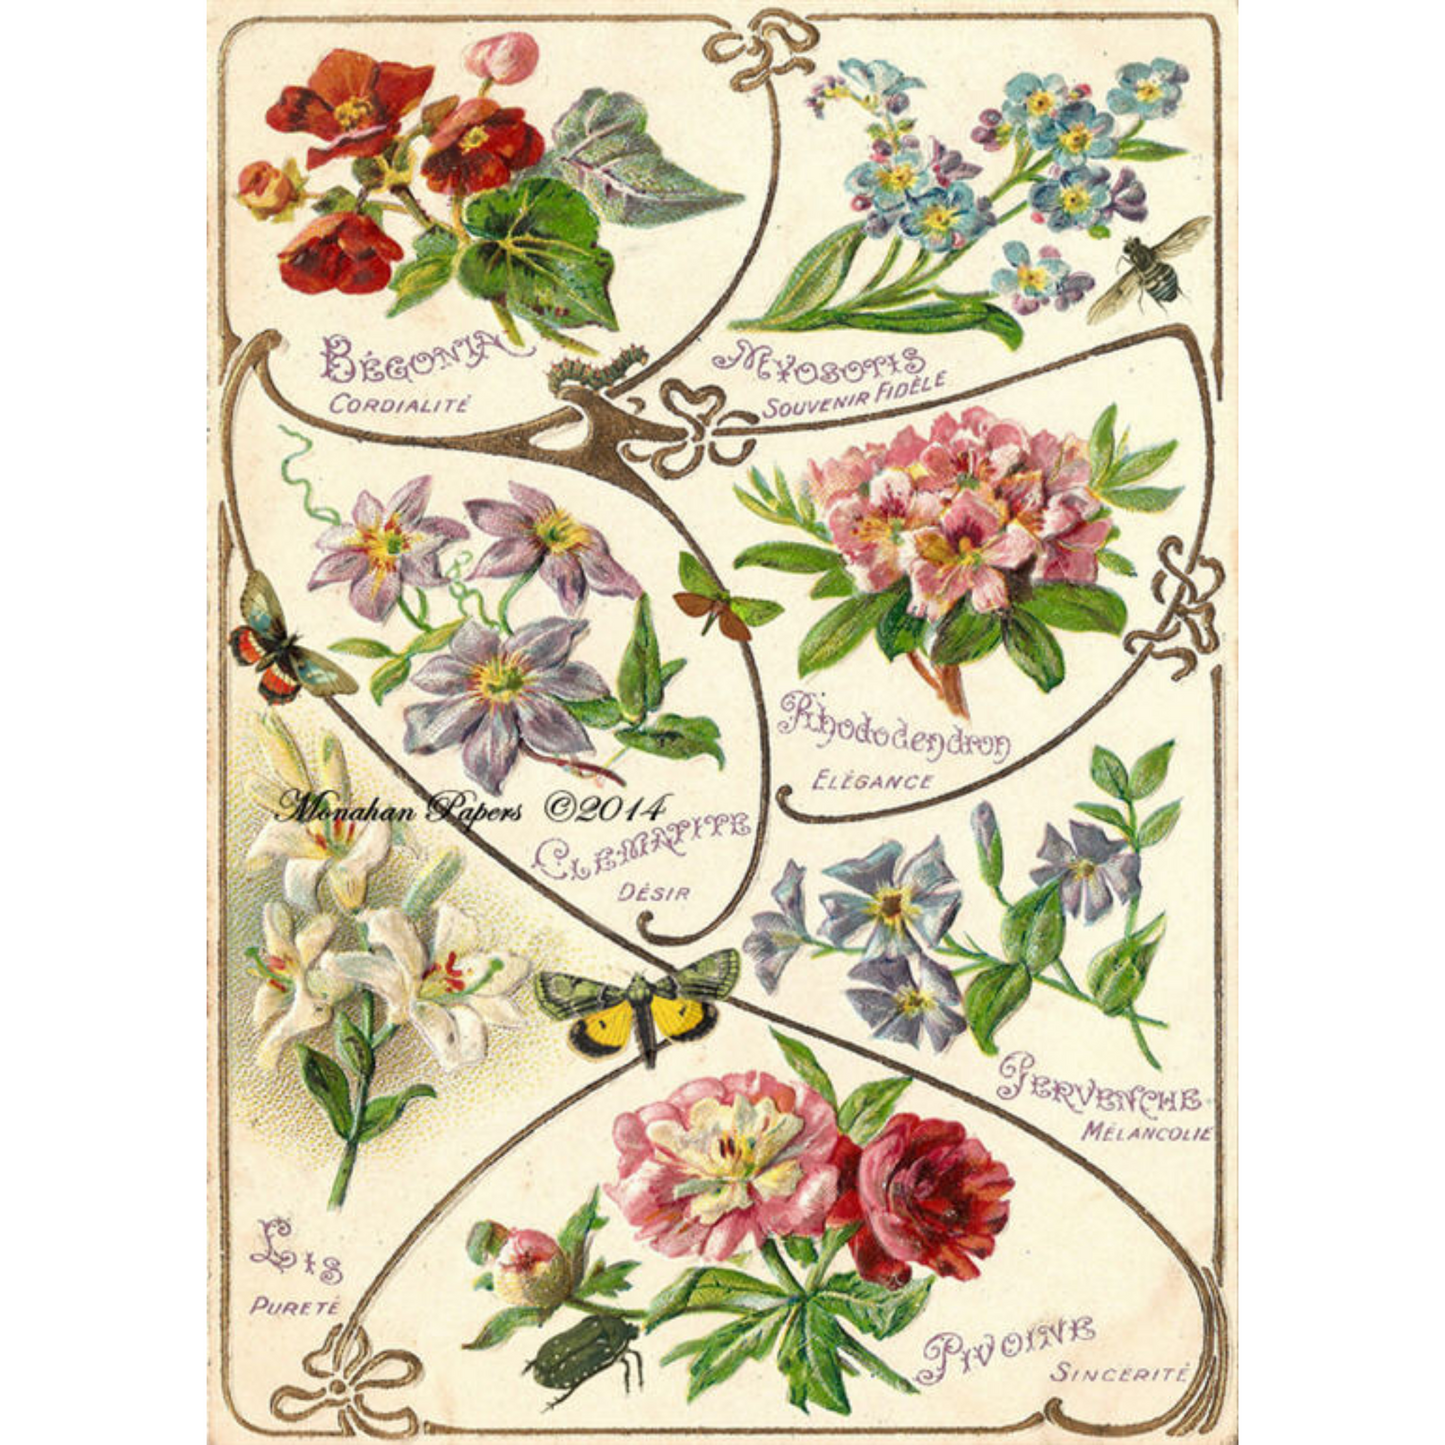 All The Pretty Flowers-11" x 17" decoupage paper from Monahan Papers available at Milton's Daughter